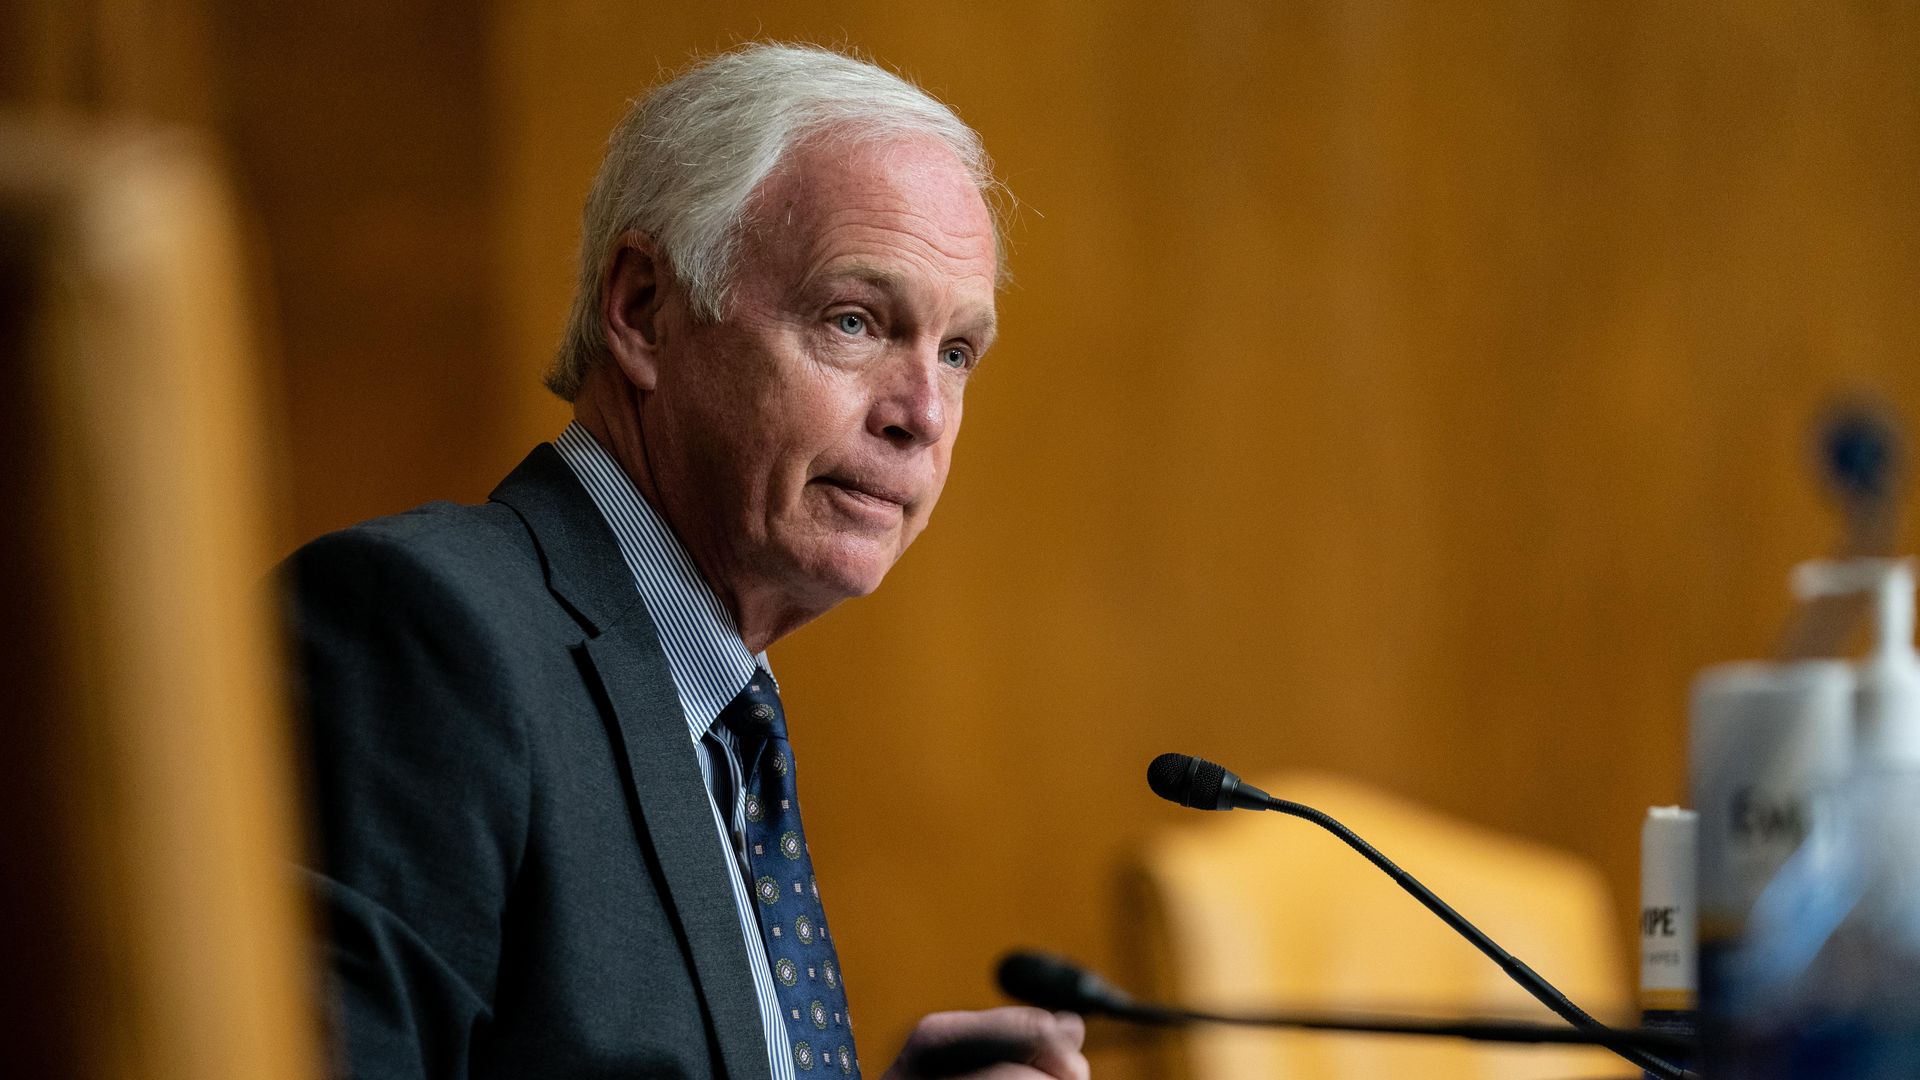 Sen. Ron Johnson speaks during a Senate Budget Committee confirmation hearing for Neera Tanden